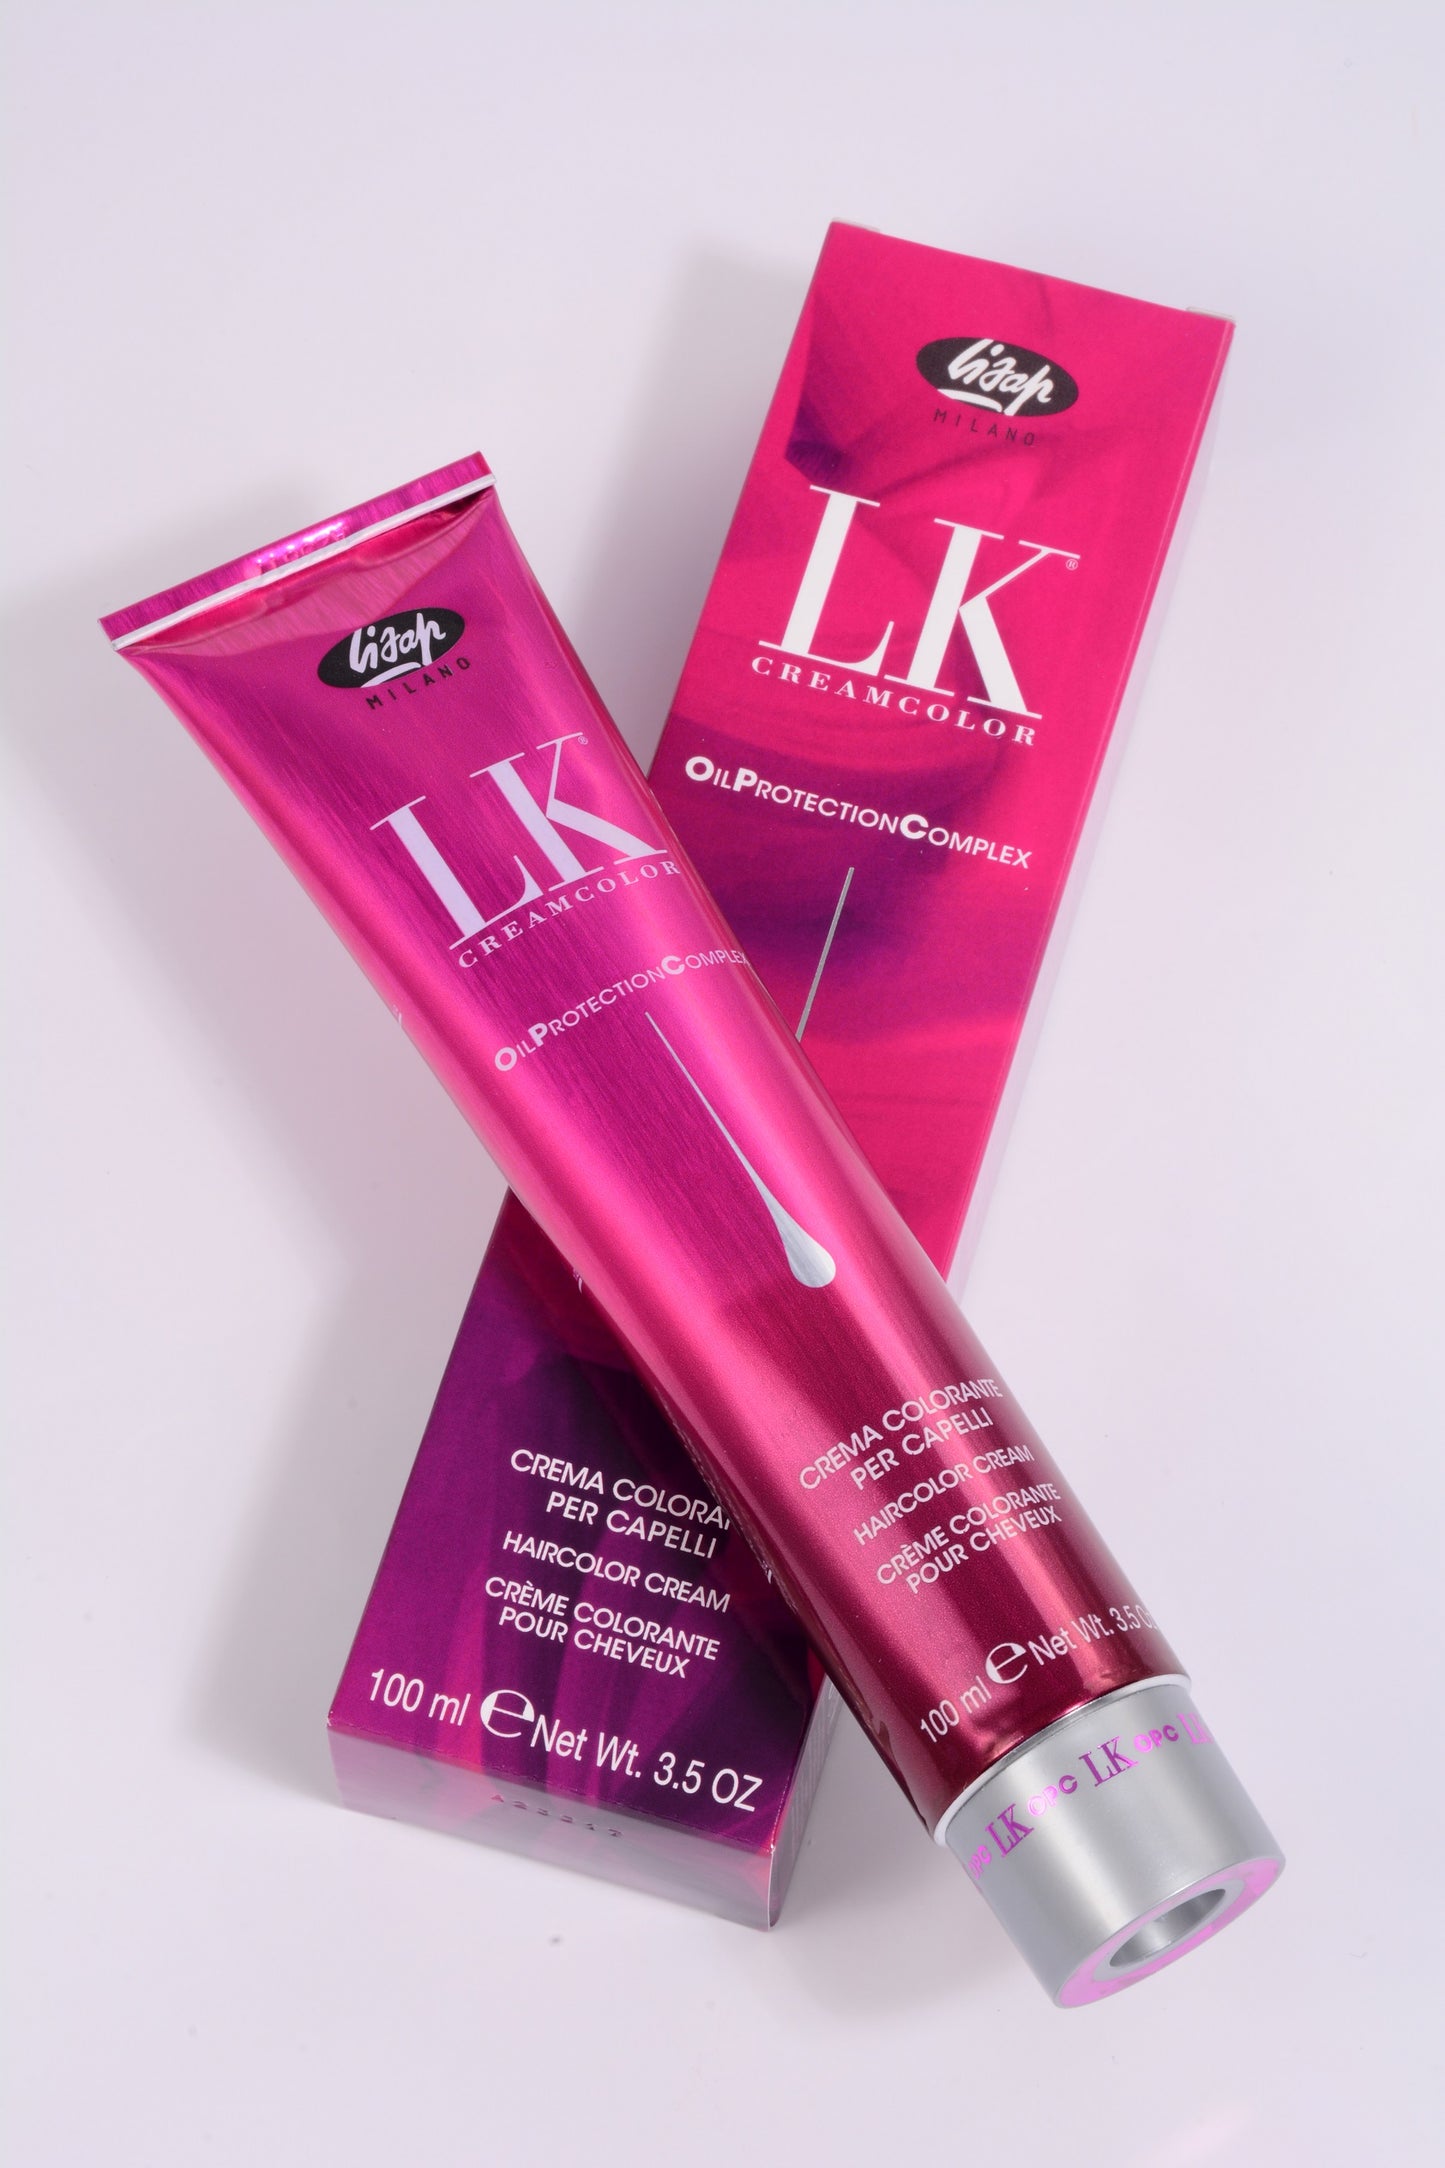 LK Creamcolor 5/2 Oil Protection Complex